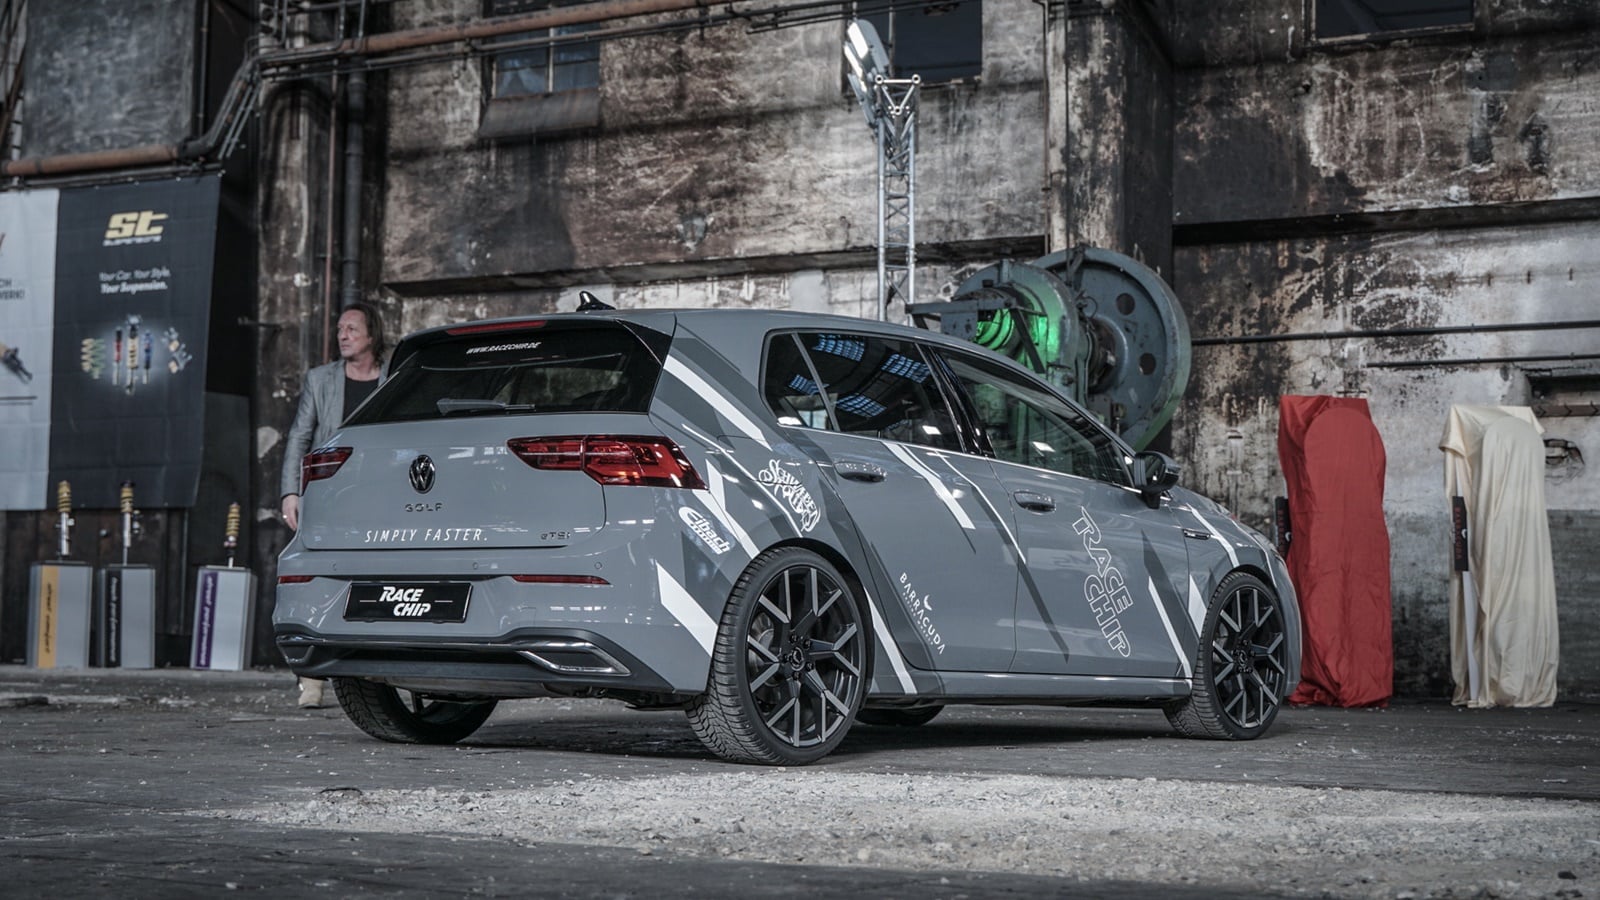 Up to 192 hp and 318 Nm of torque for the 1.5 TSI block of the Volkswagen Golf Mk8